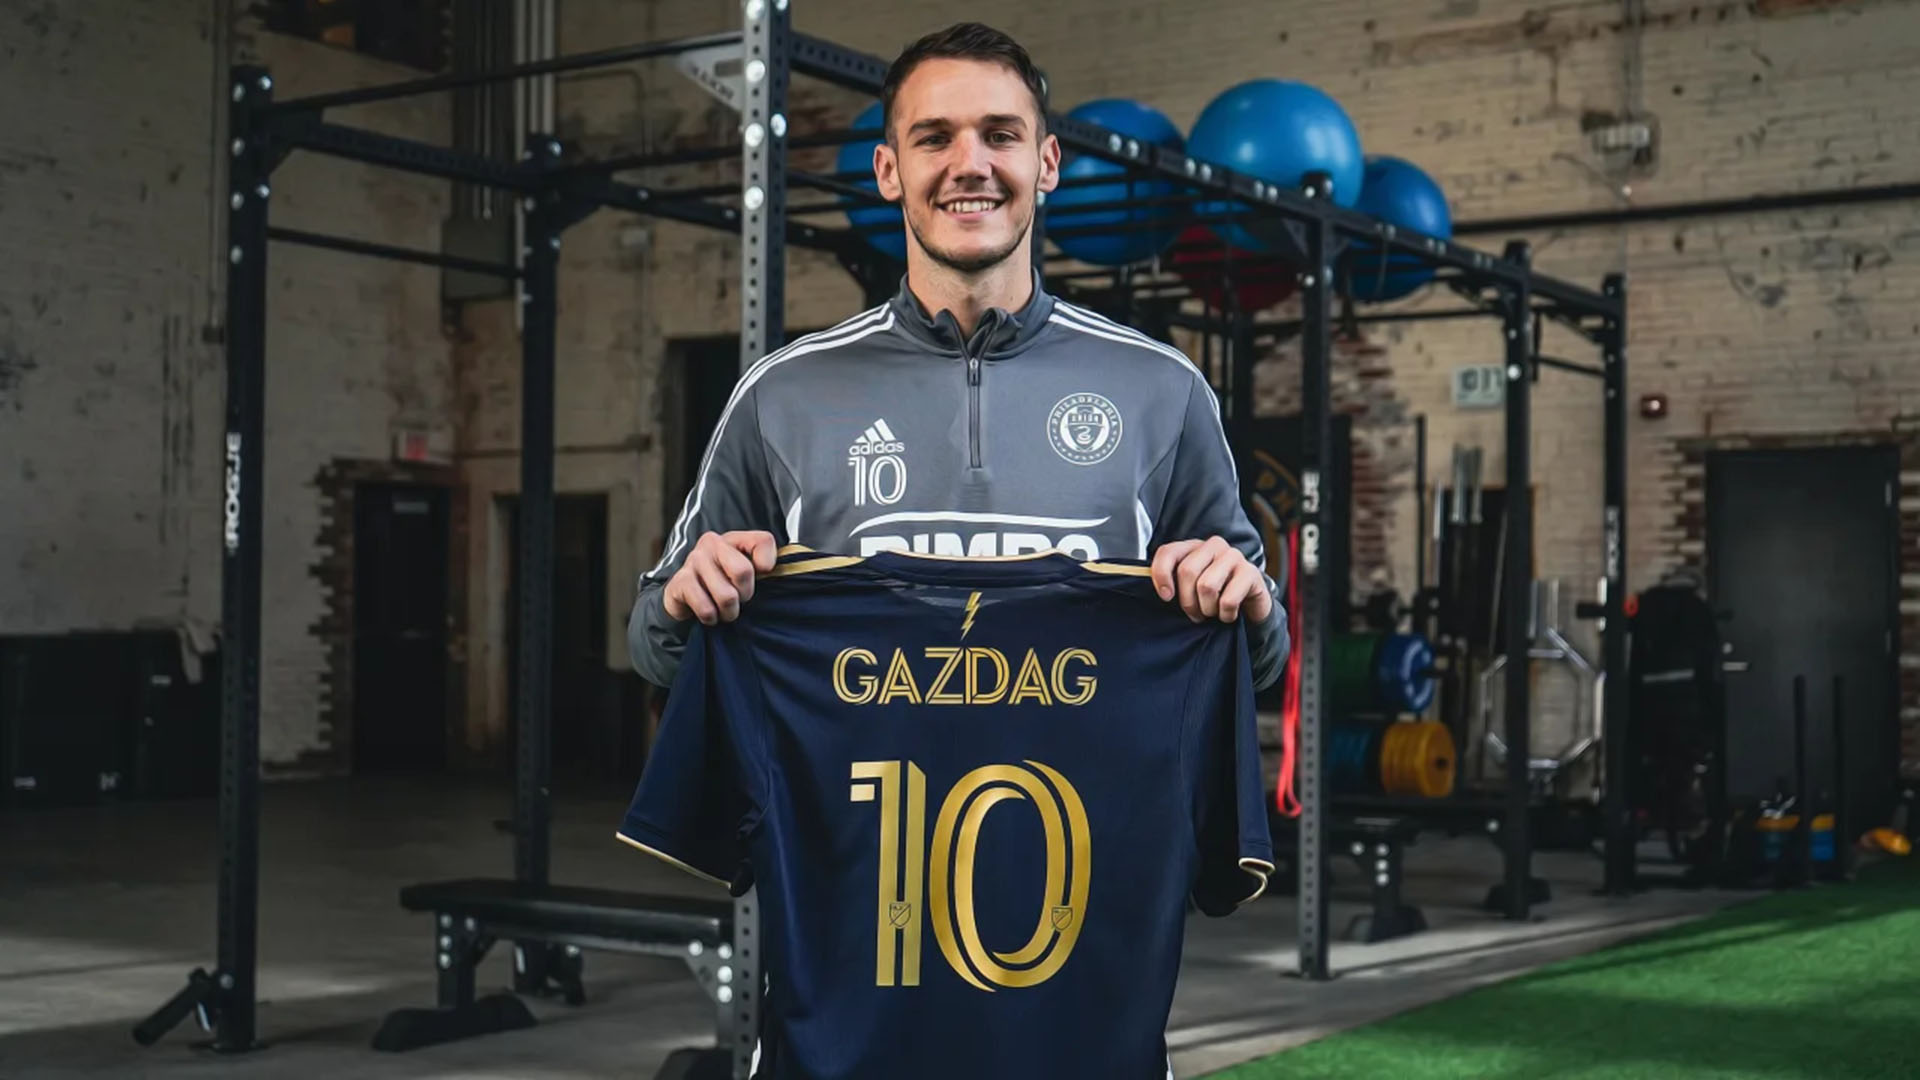 The agreement also includes an option for 2026. According to Tanner, Gazdag is the franchise player for the team. In fact, this year he switched his number 6 jersey for the 10.